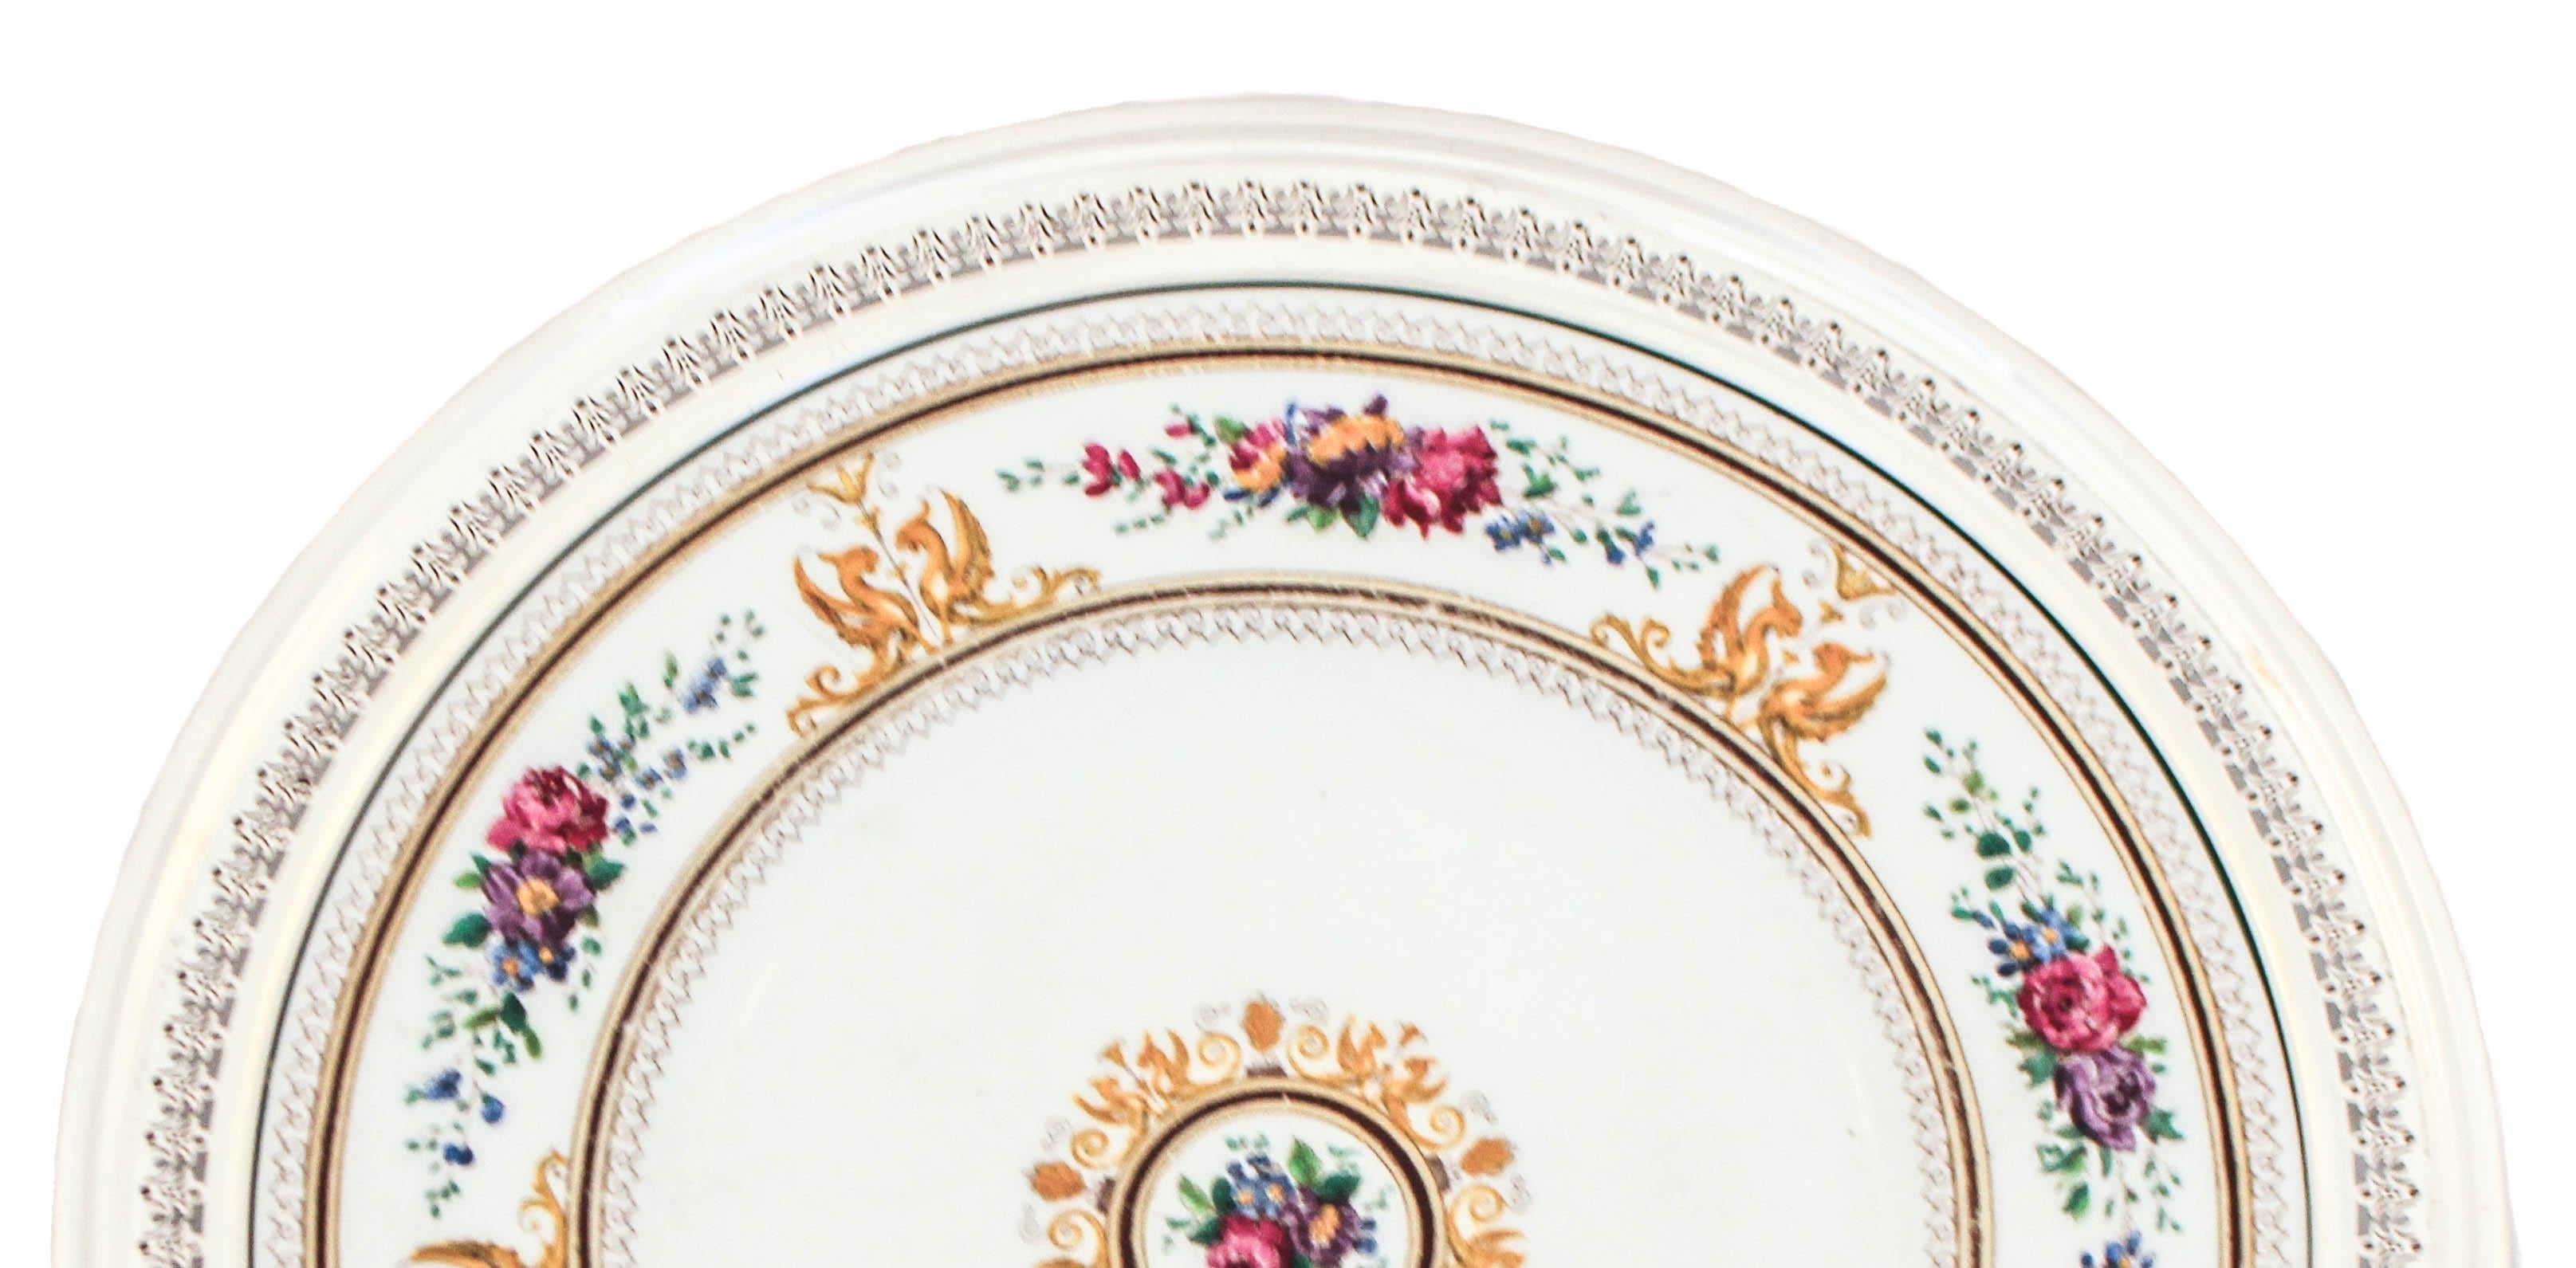 Being offered is a sterling silver and porcelain tray.  The sterling silver rim was designed and manufactured by George Henckel & Company while the porcelain tray was manufactured by Wedgwood of England.  The silver rim has a cutout motif going all